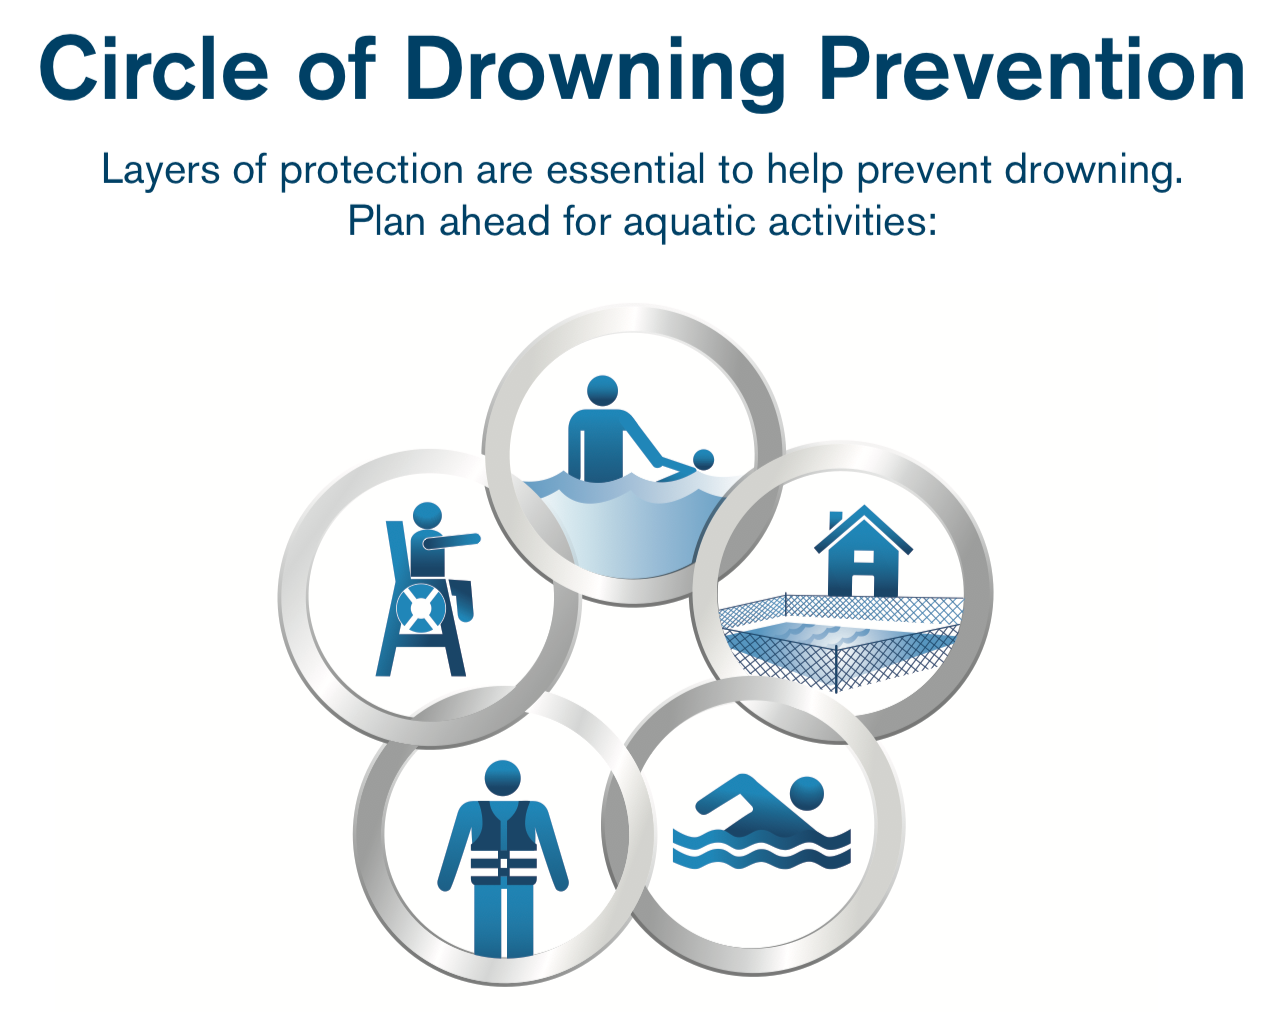 Circle of Drowning Prevention